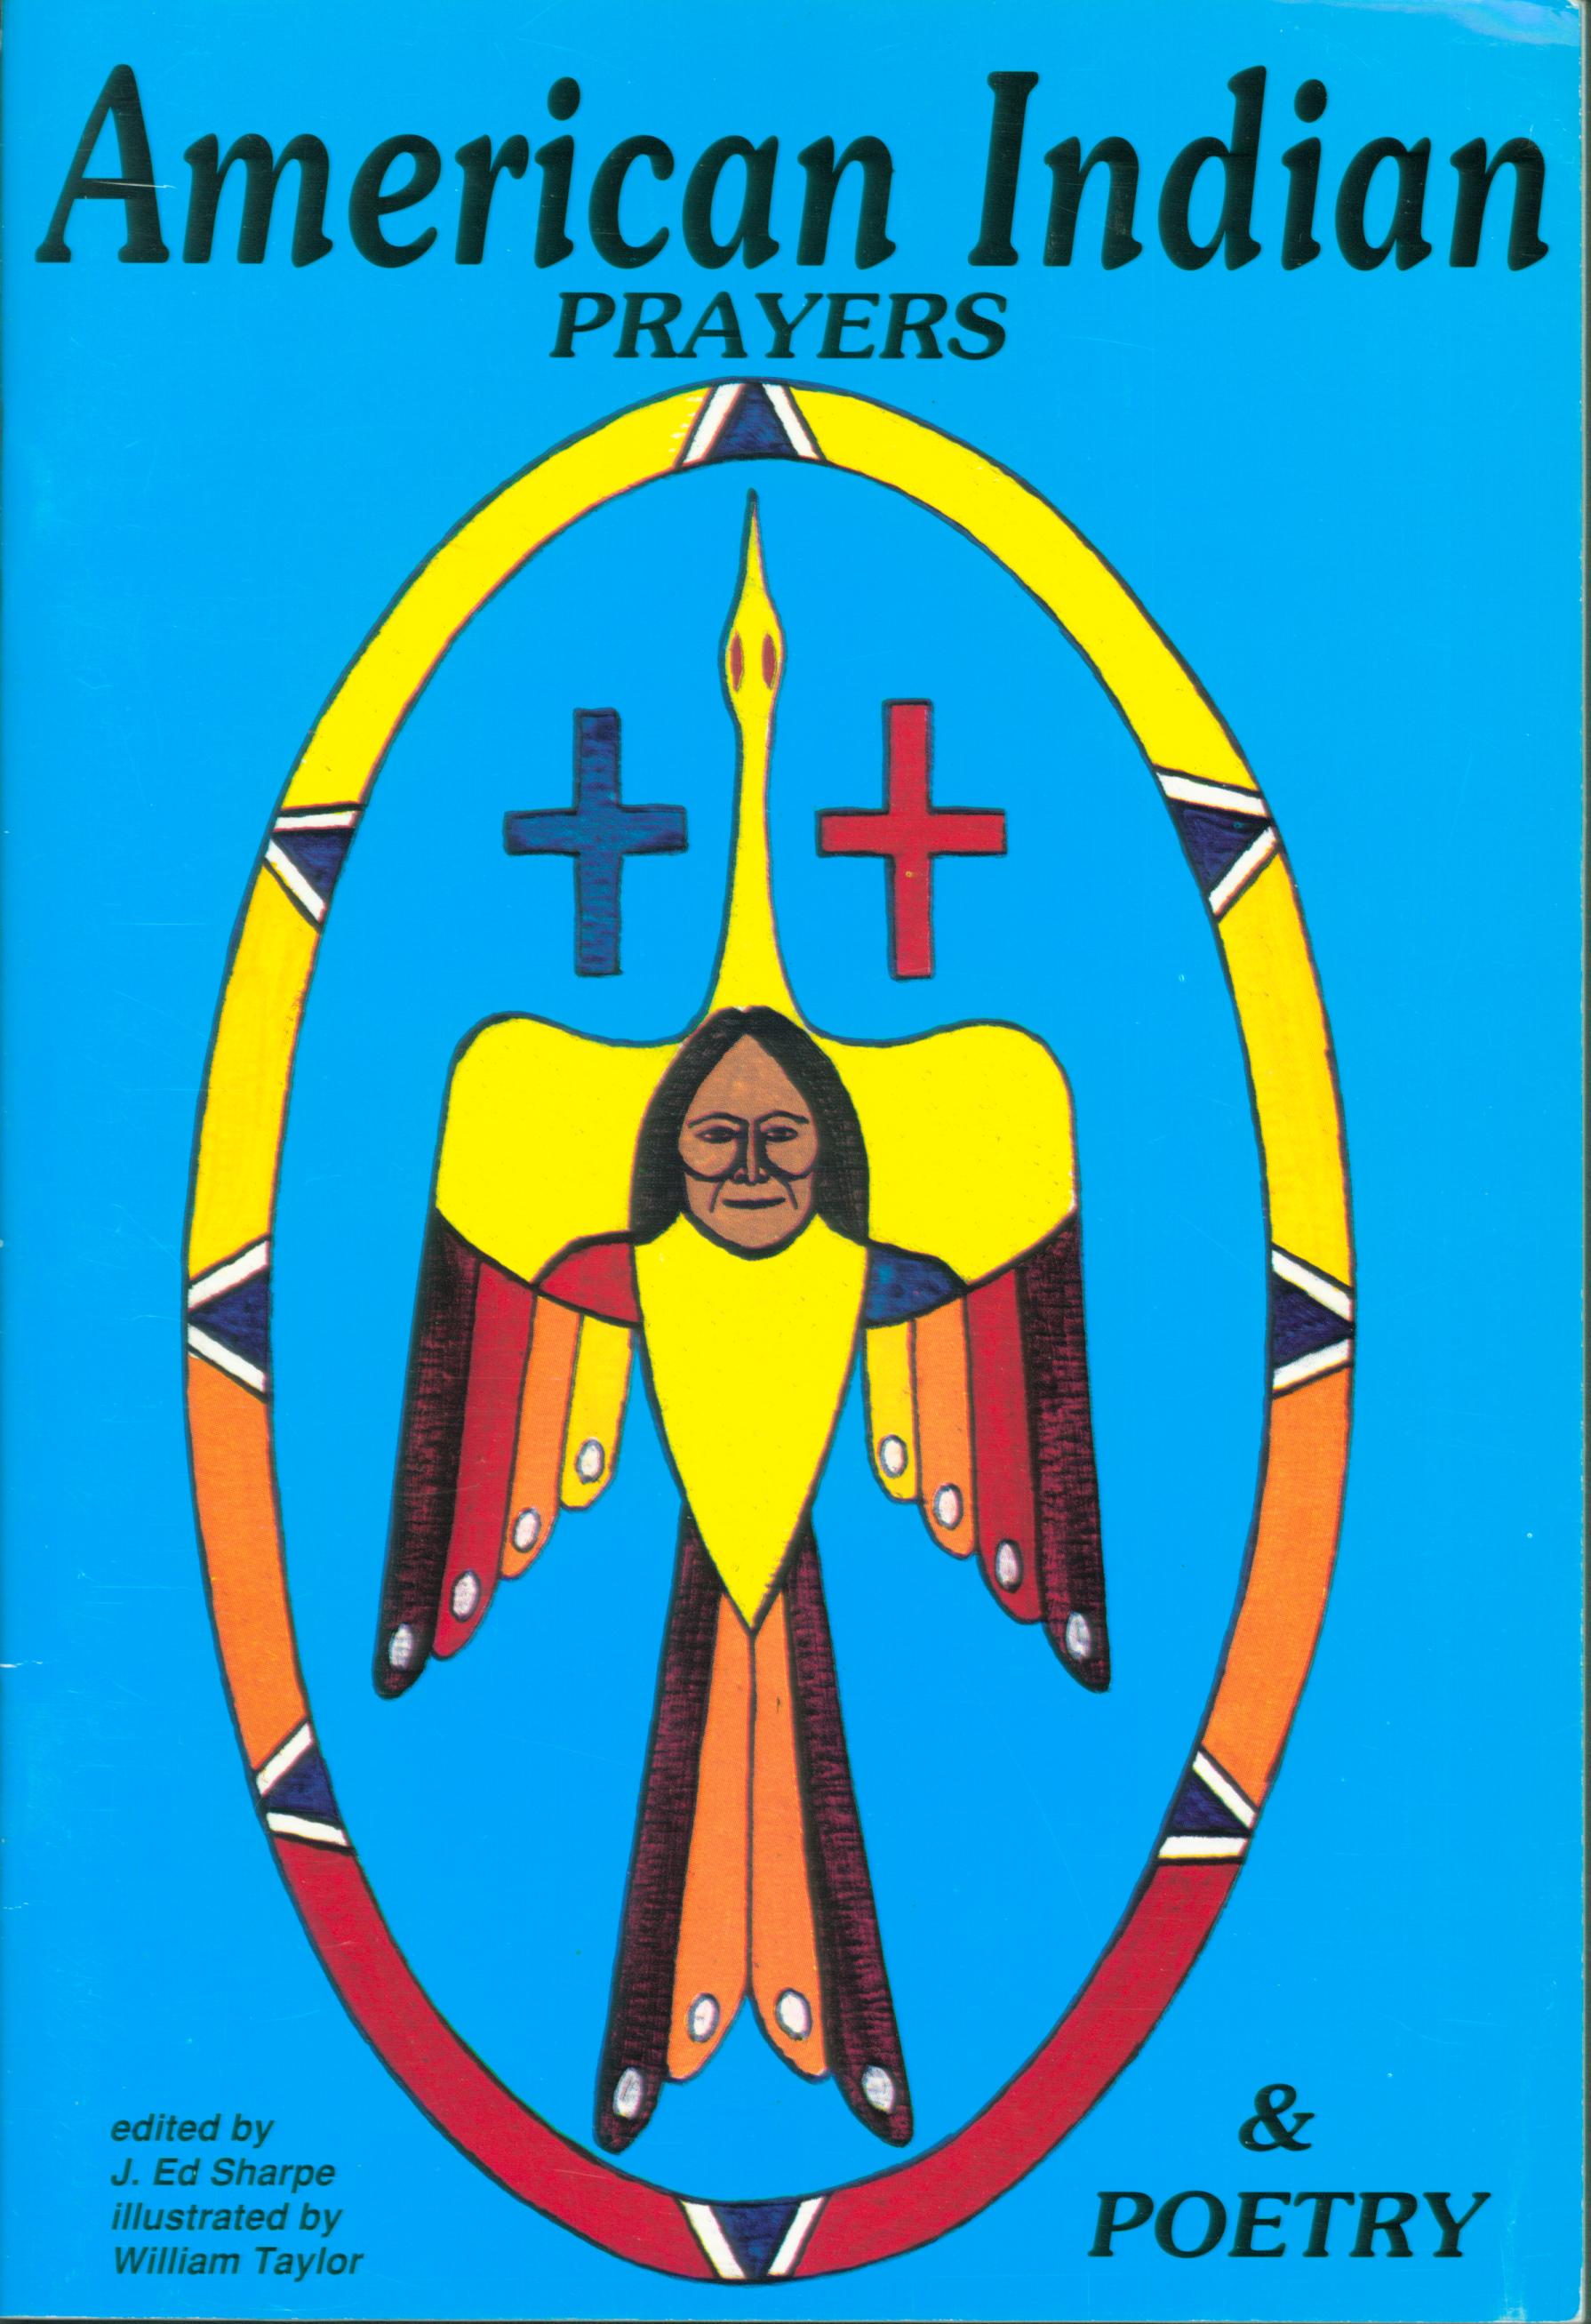 AMERICAN INDIAN PRAYERS AND POETRY.